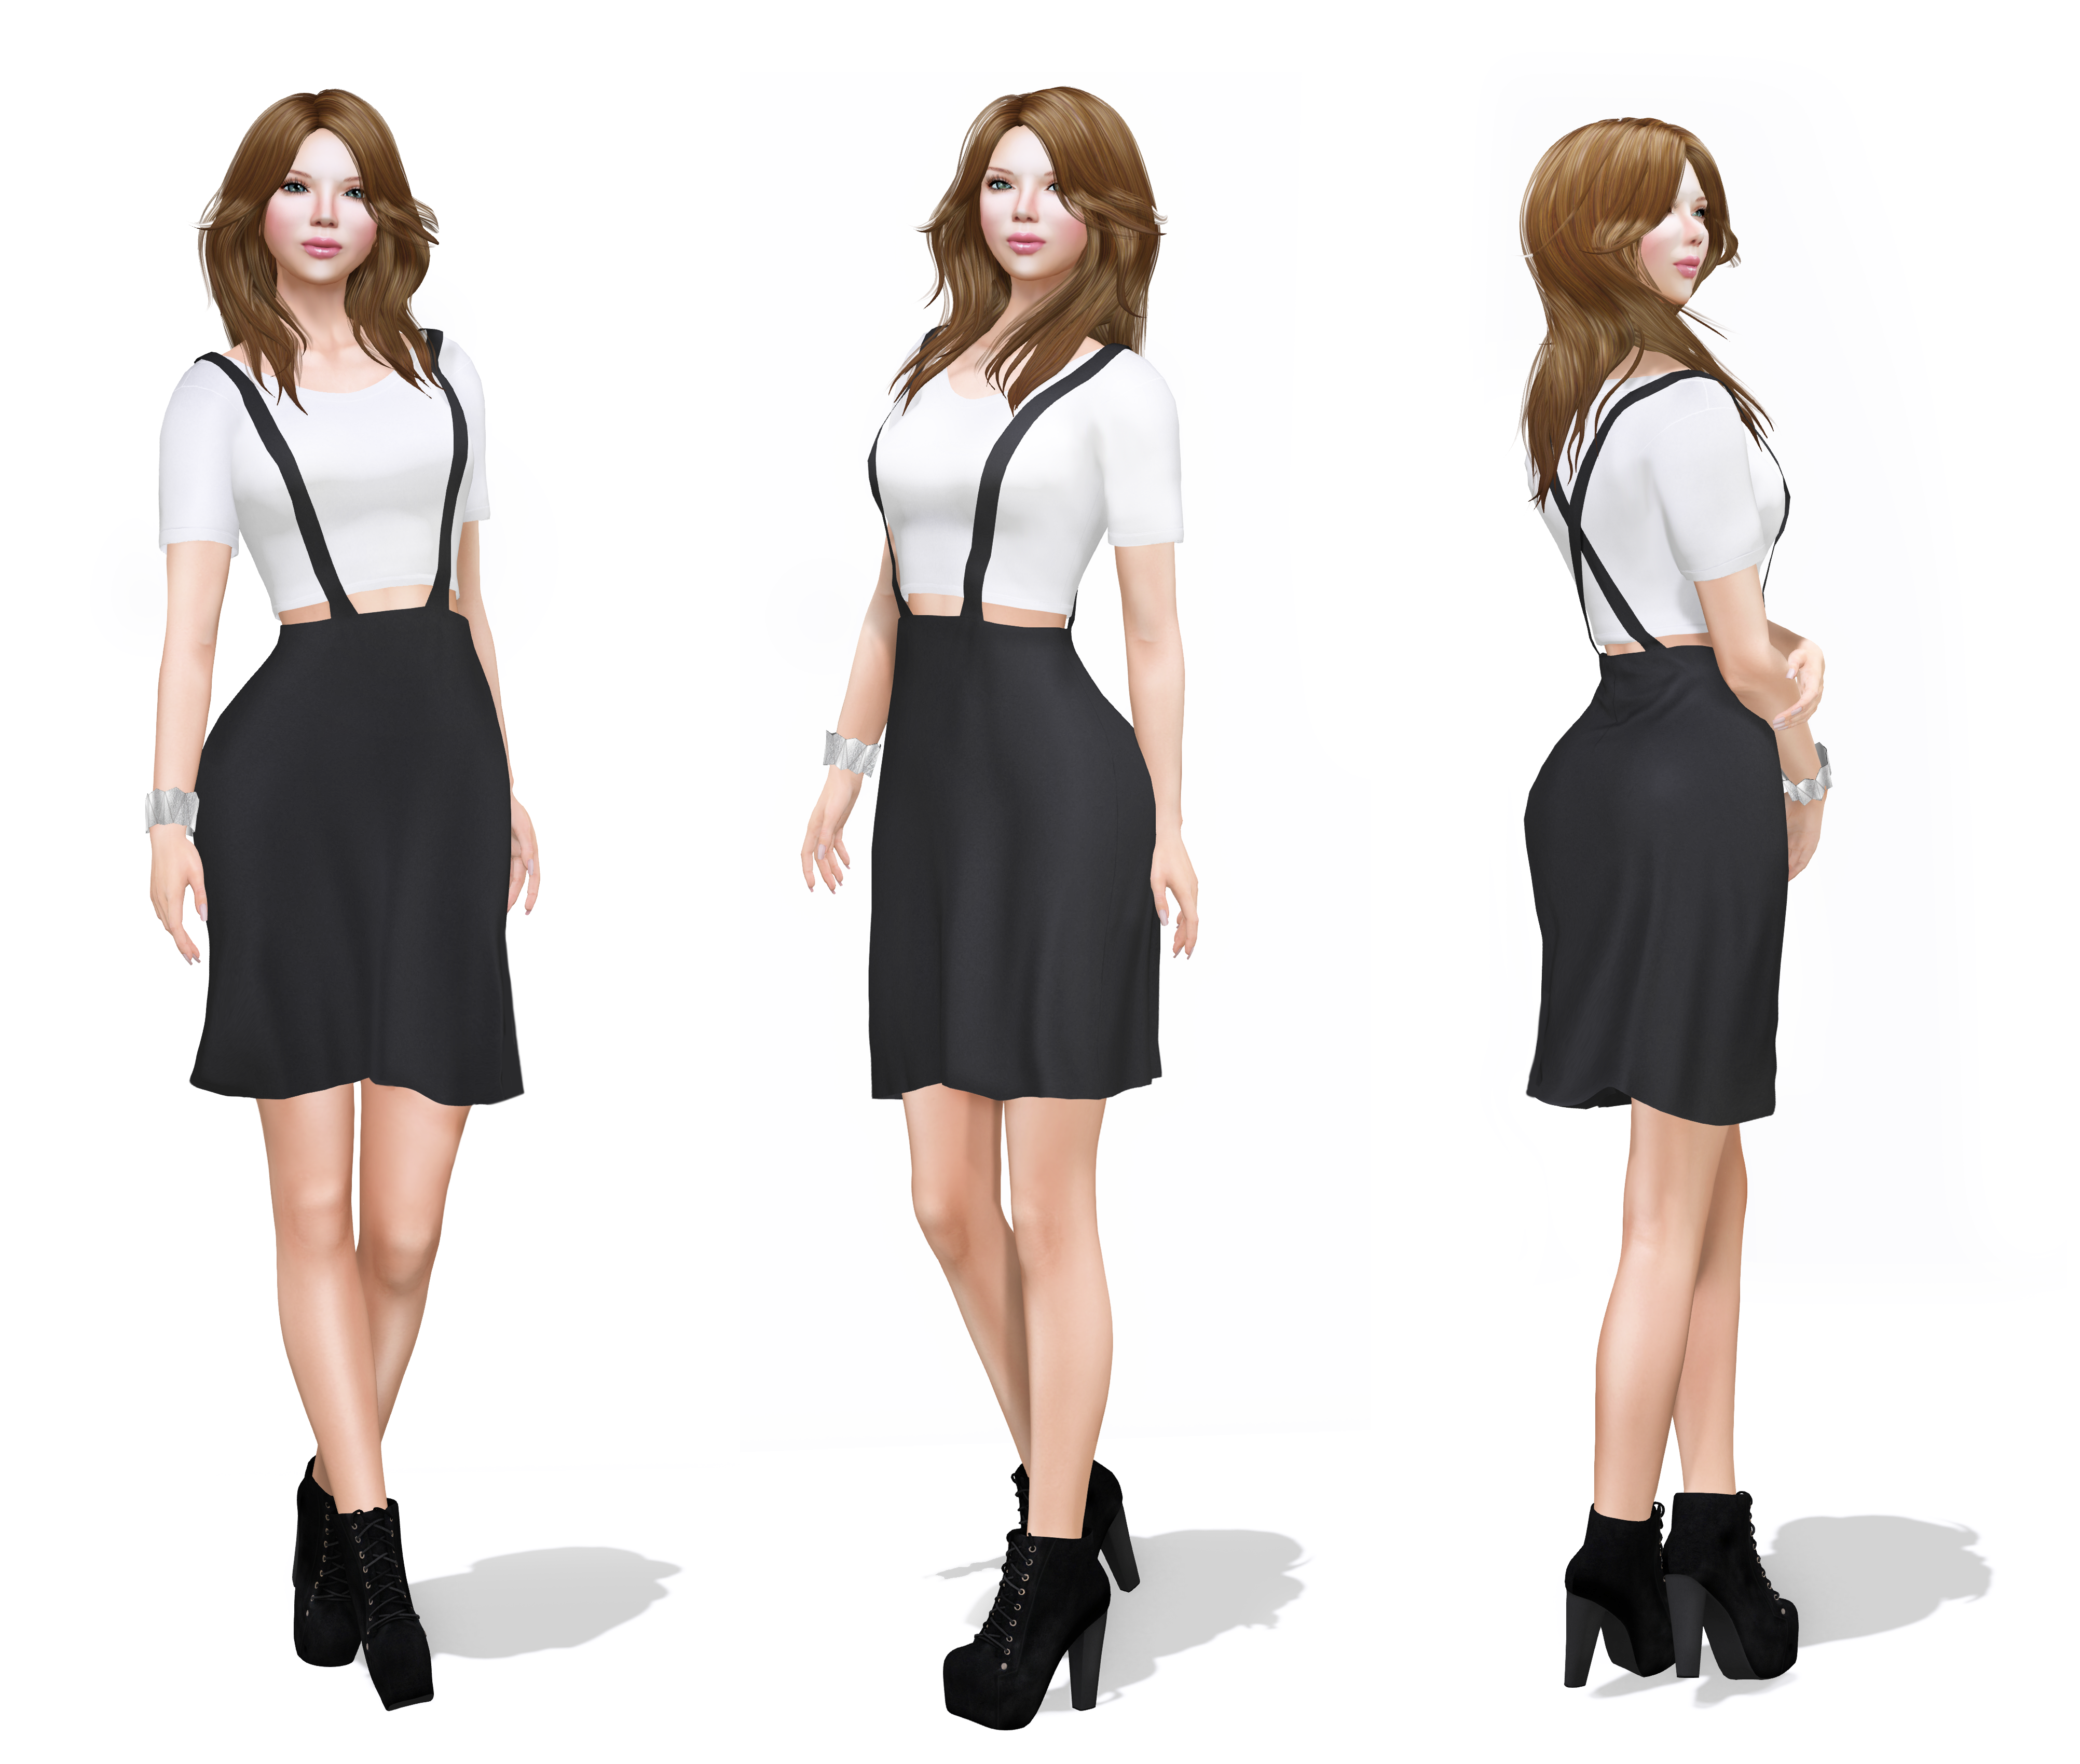 MI Above Knee Overall Flared Skirt Outfit 5 Options